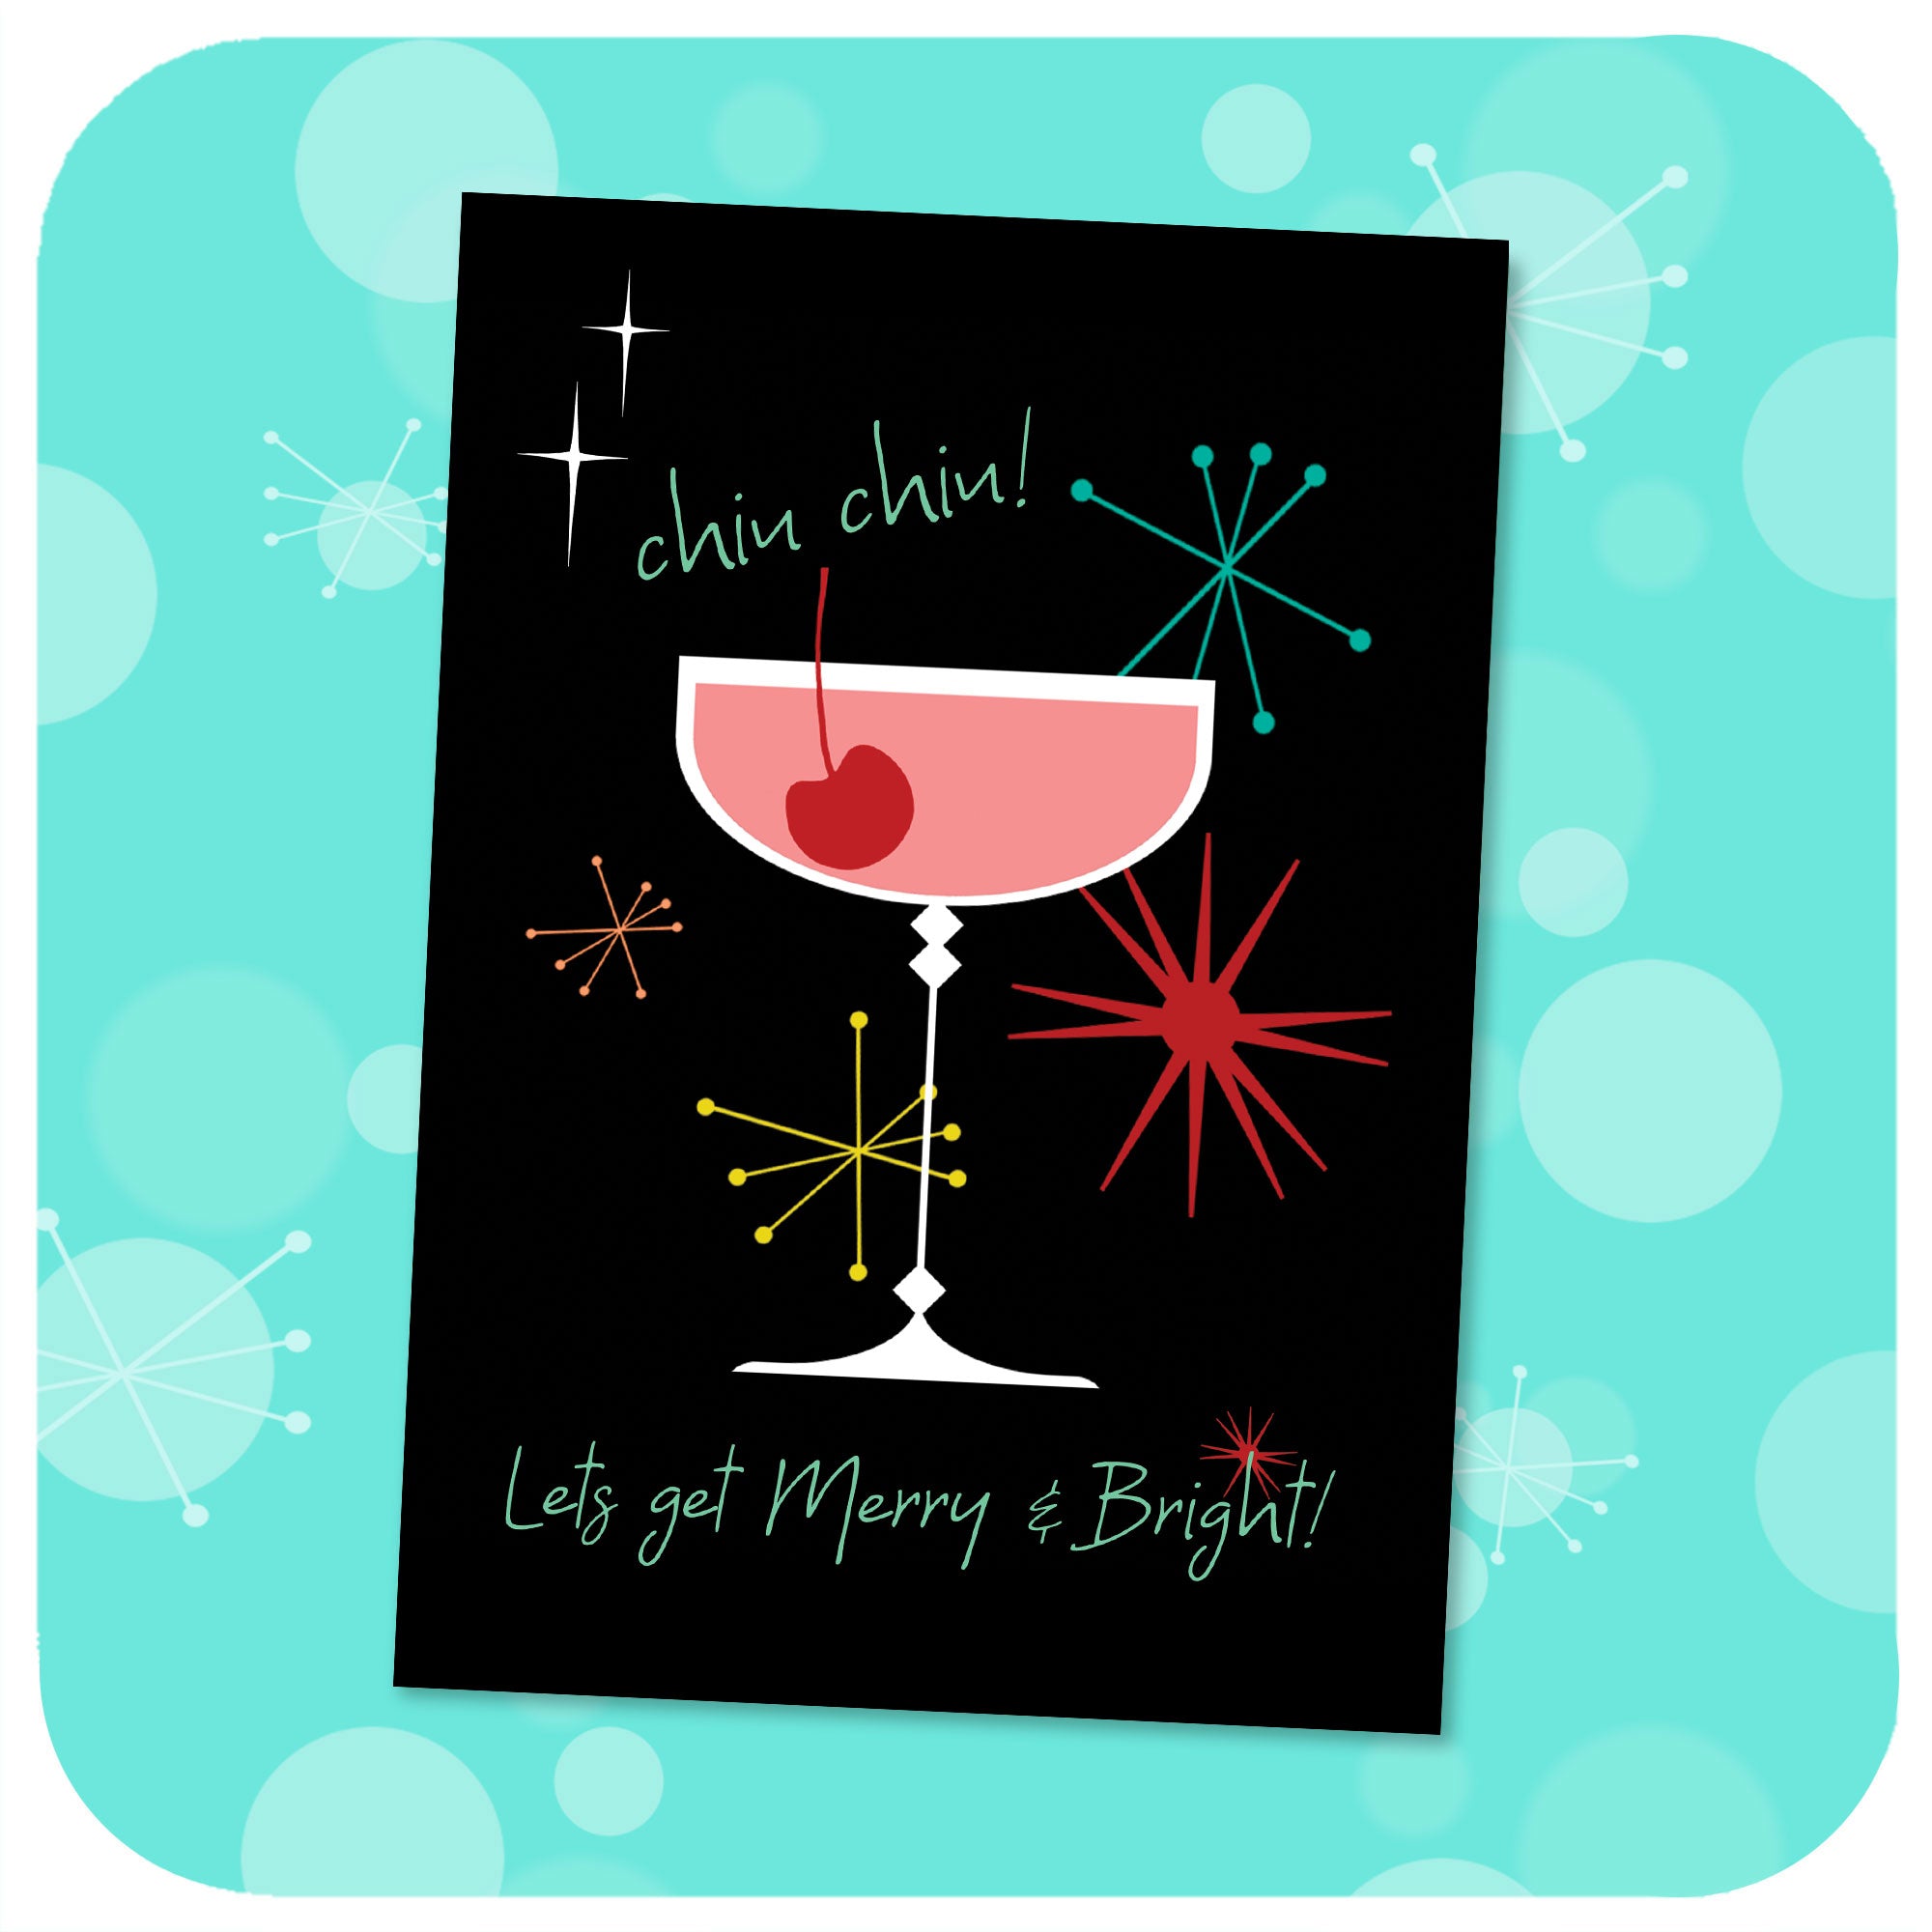 Chin chin! Let's Get Merry & Bright! Mid century style Christmas card on a textured turquoise background | The Inkabilly Emporium